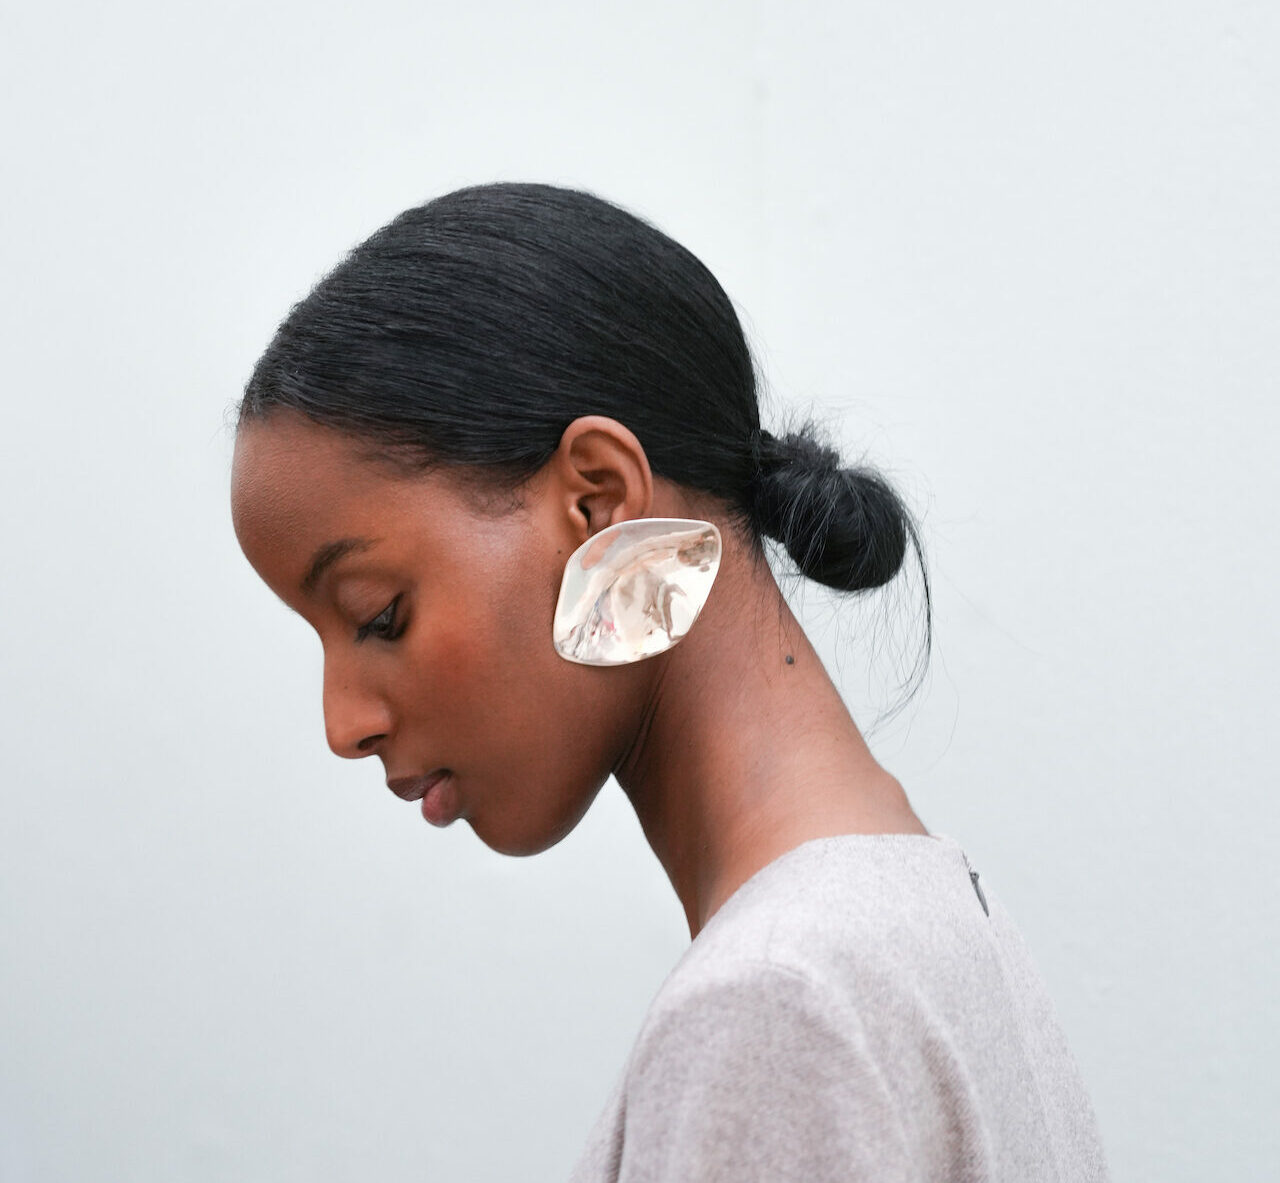 Levitas: A Jewelry Collection Rooted in Conscious Danish Design